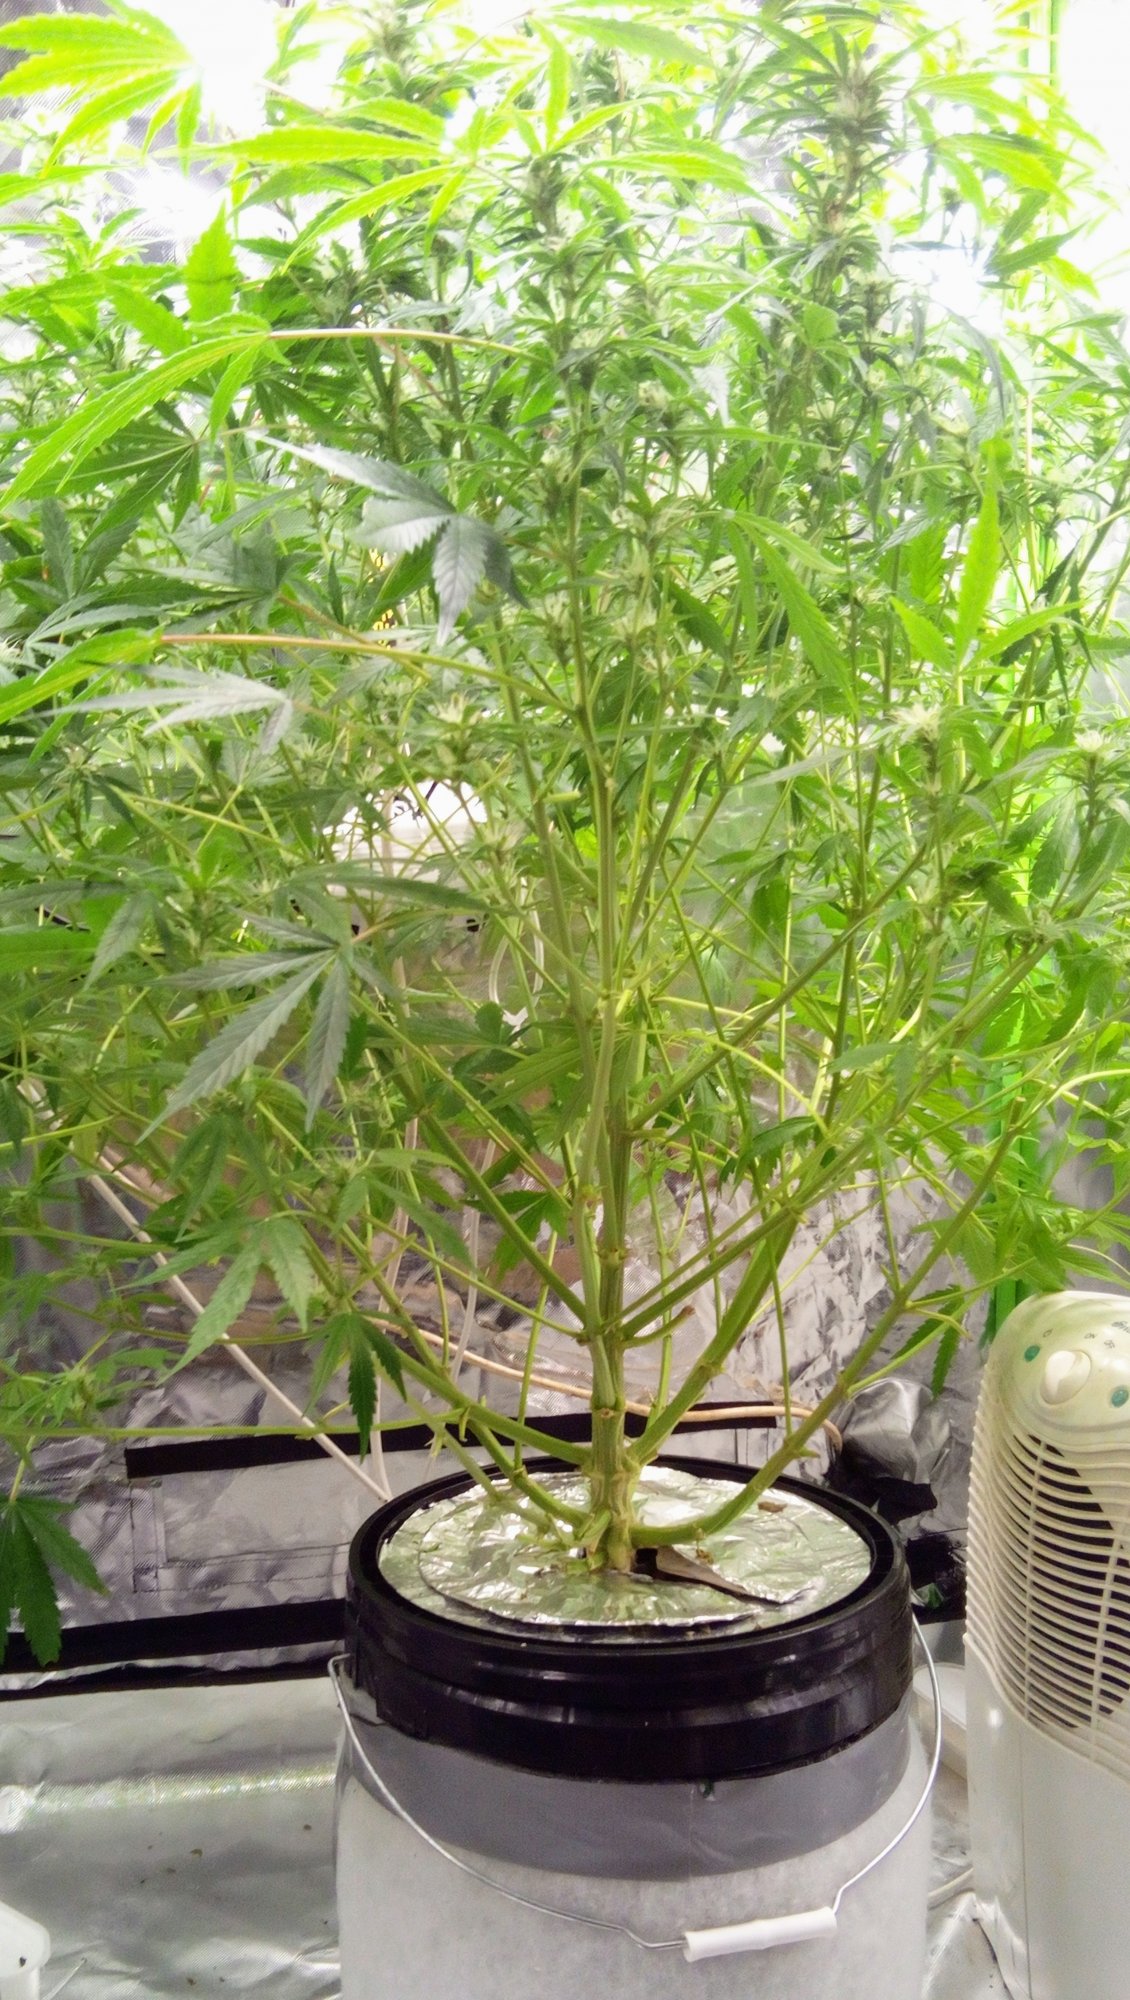 Home made rdwc system first grow adviceopinion on my girl 6